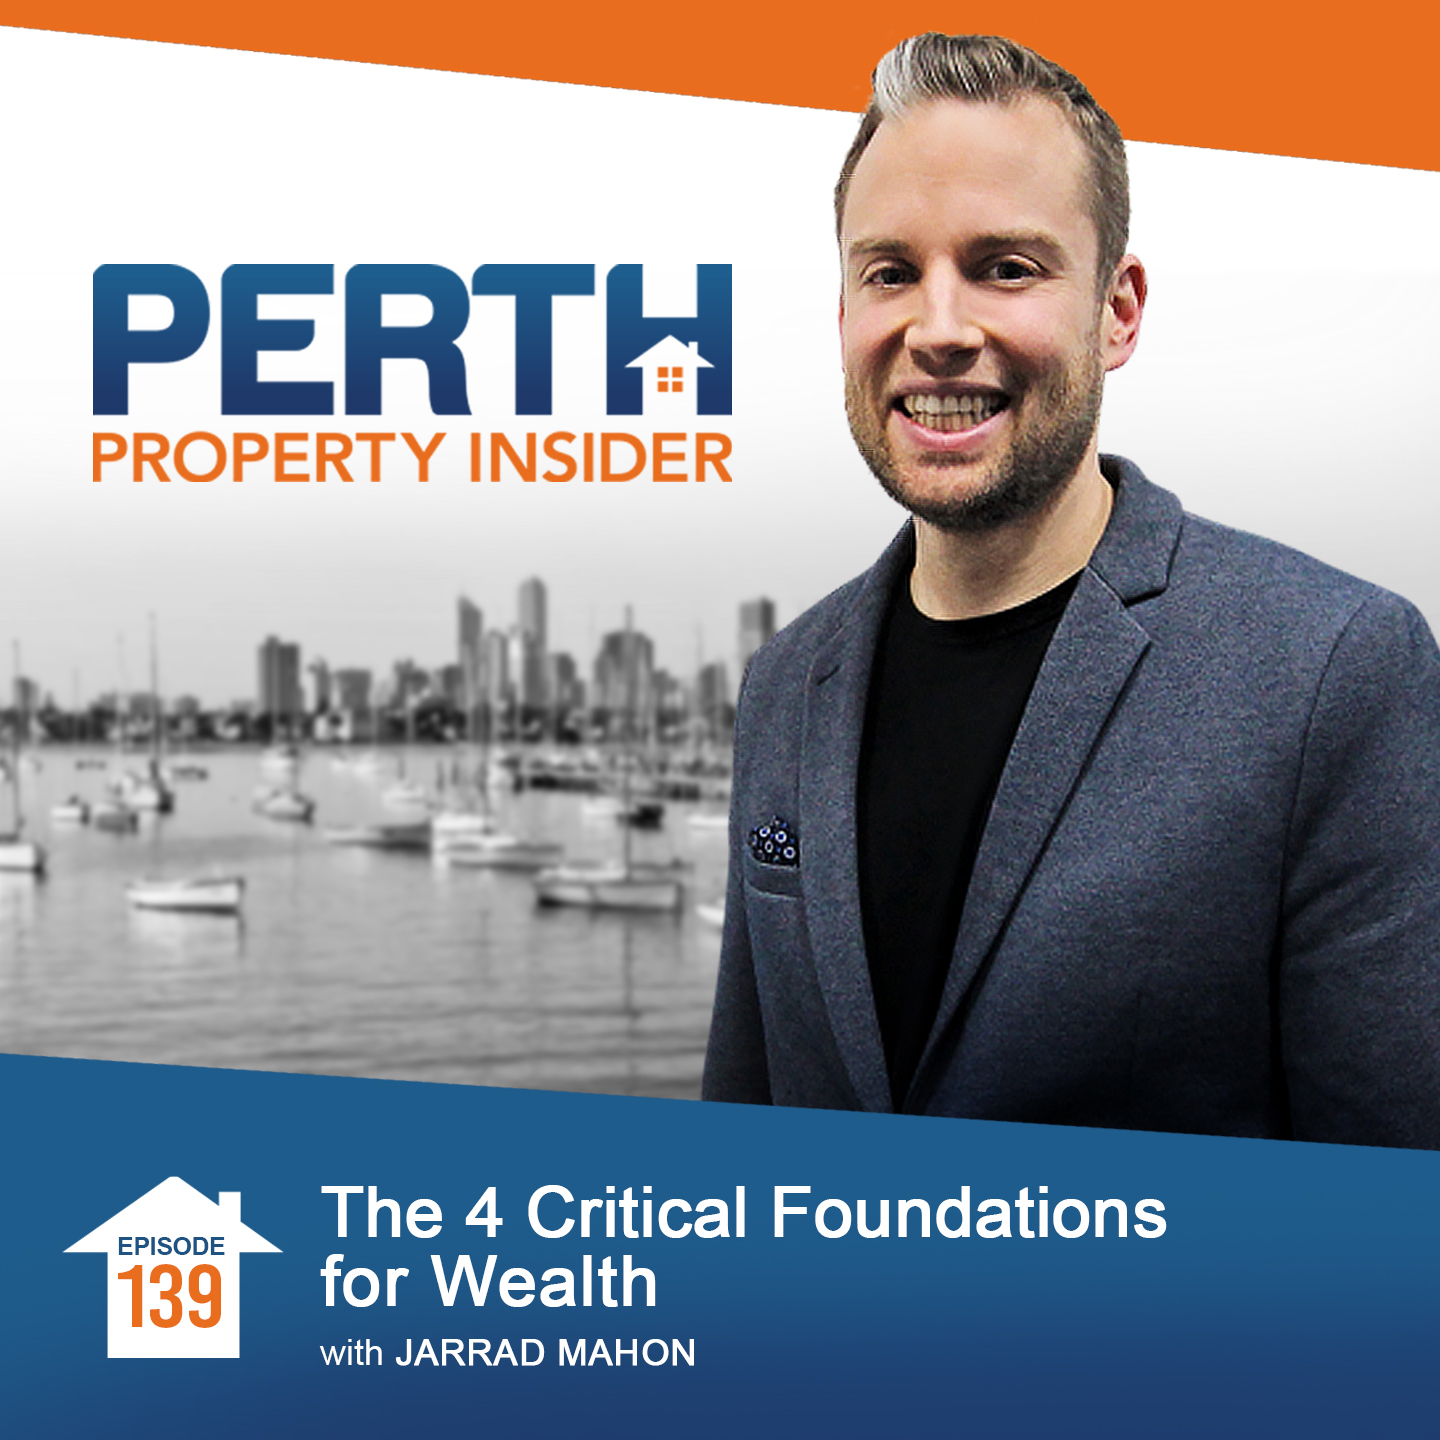 The 4 Critical Foundations for Wealth